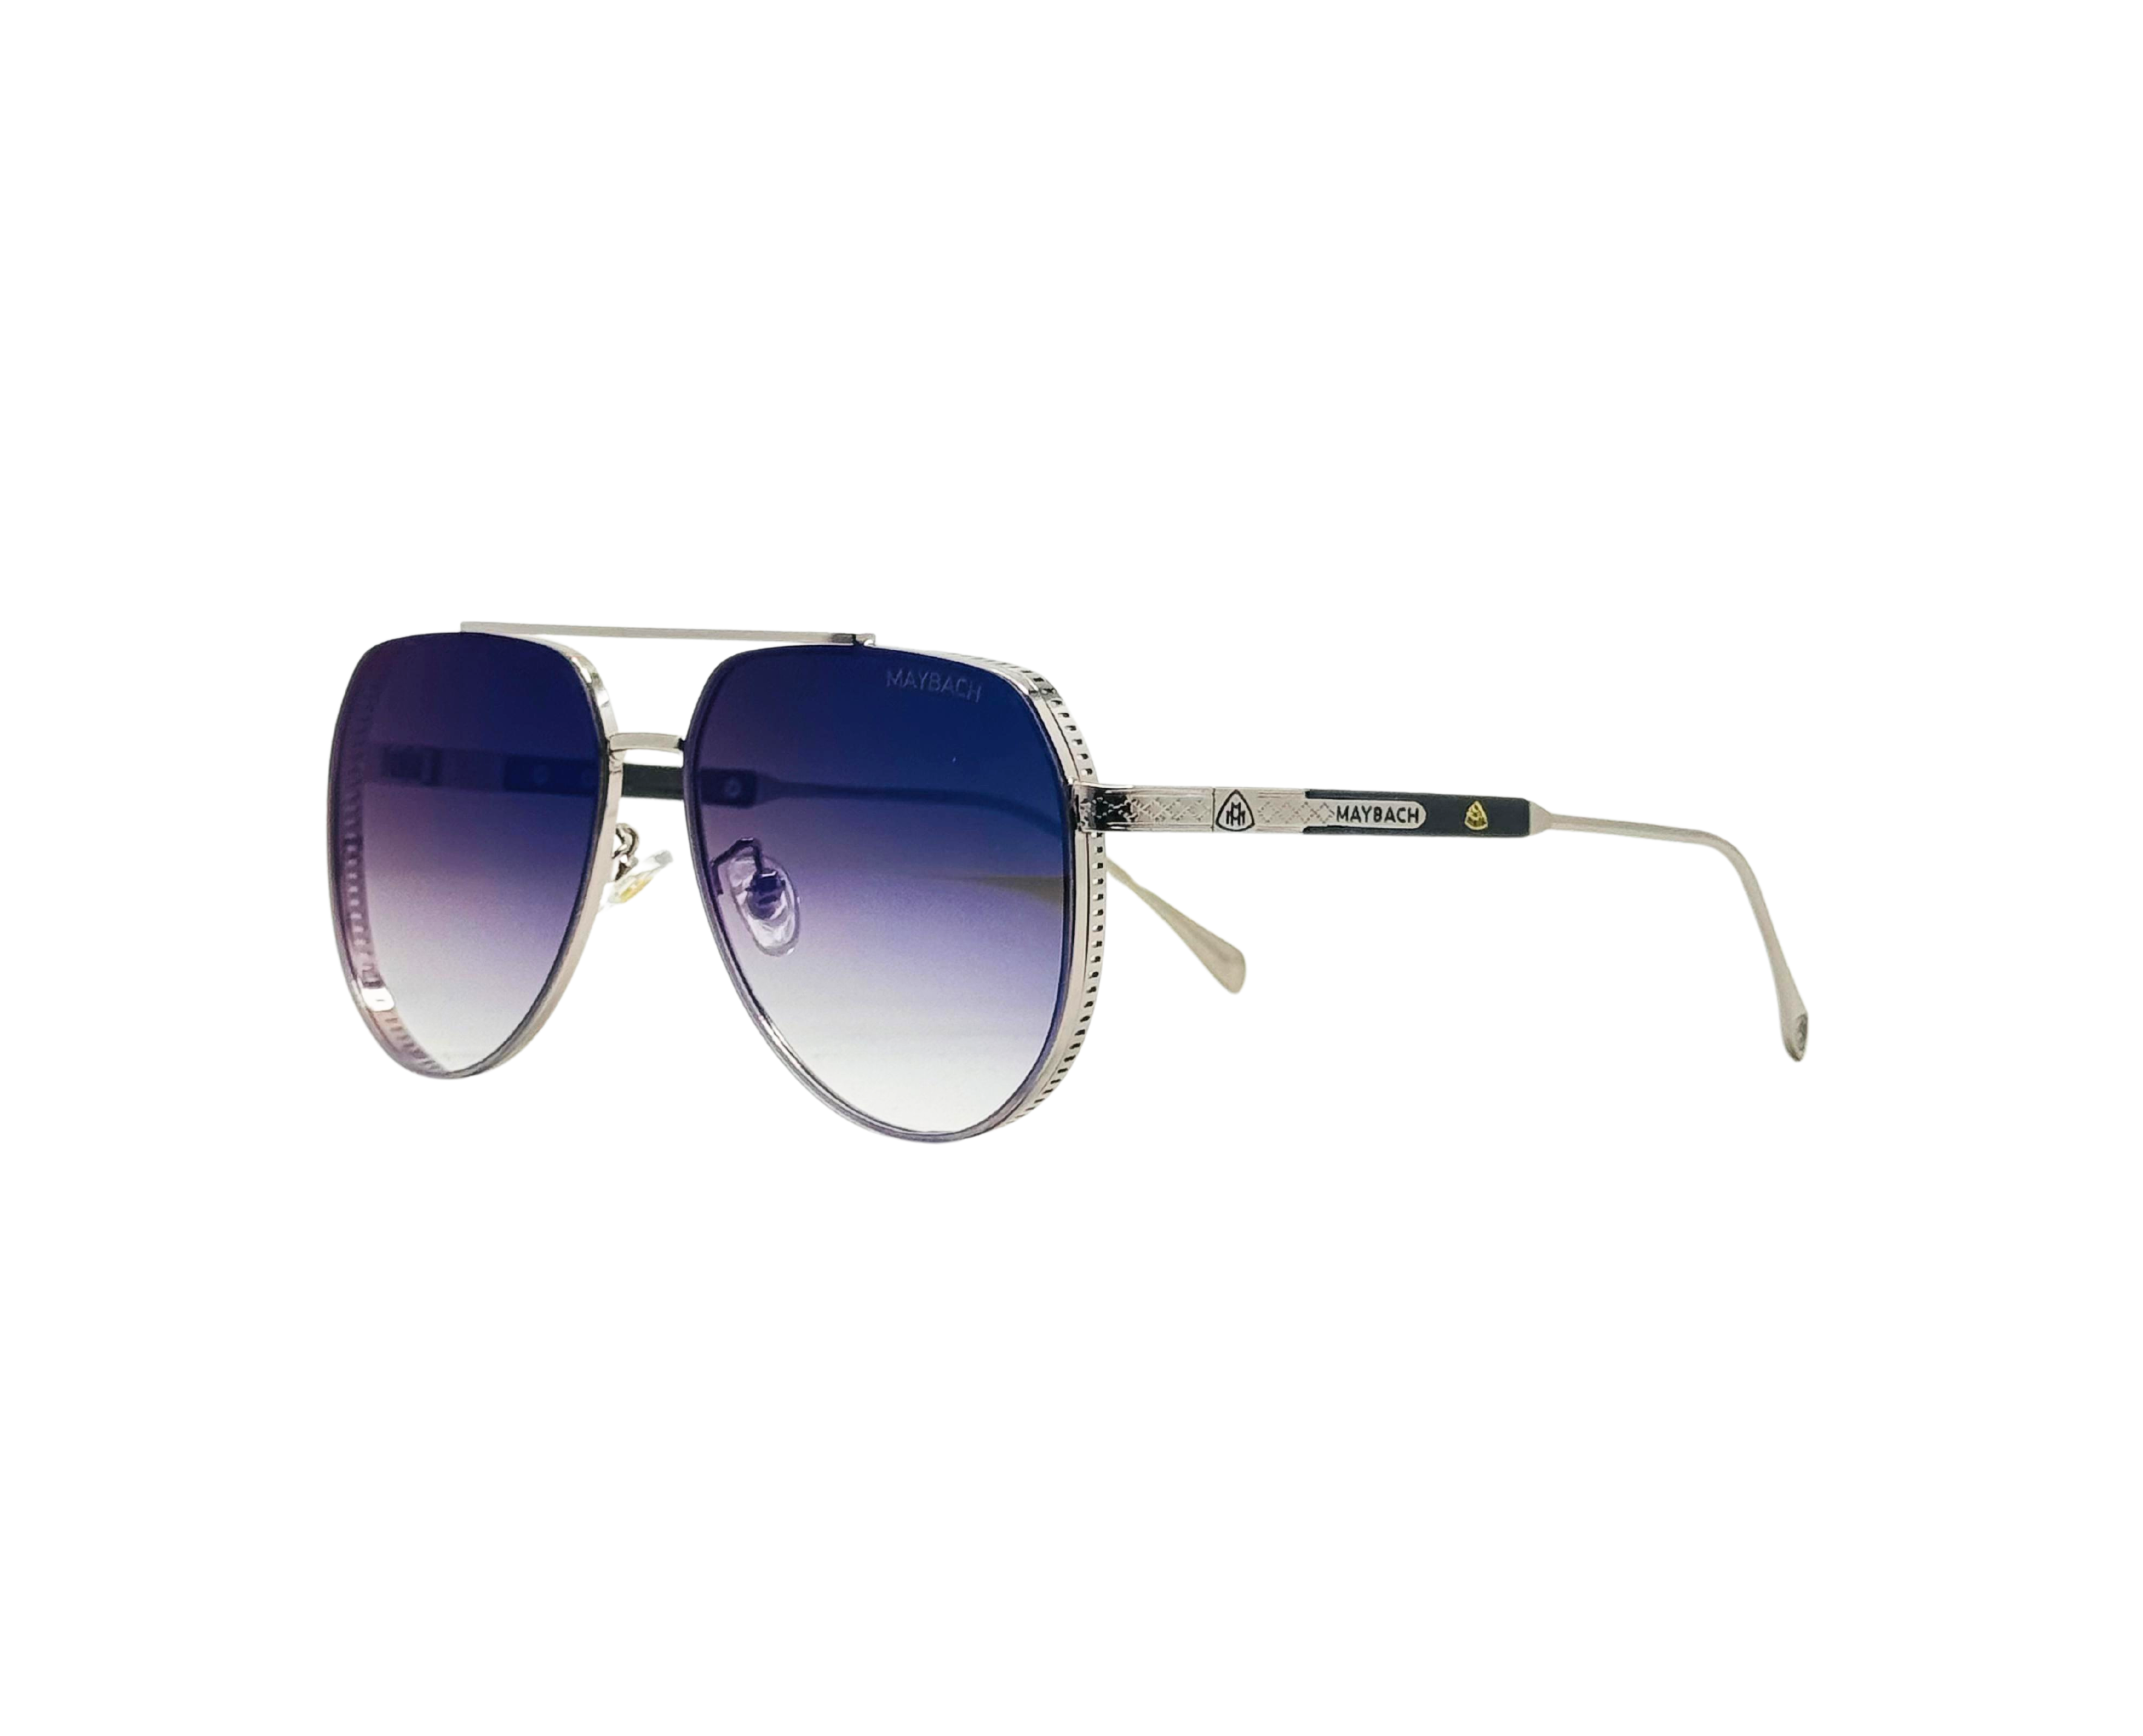 NS Deluxe - 760 - Maybach - Sunglasses